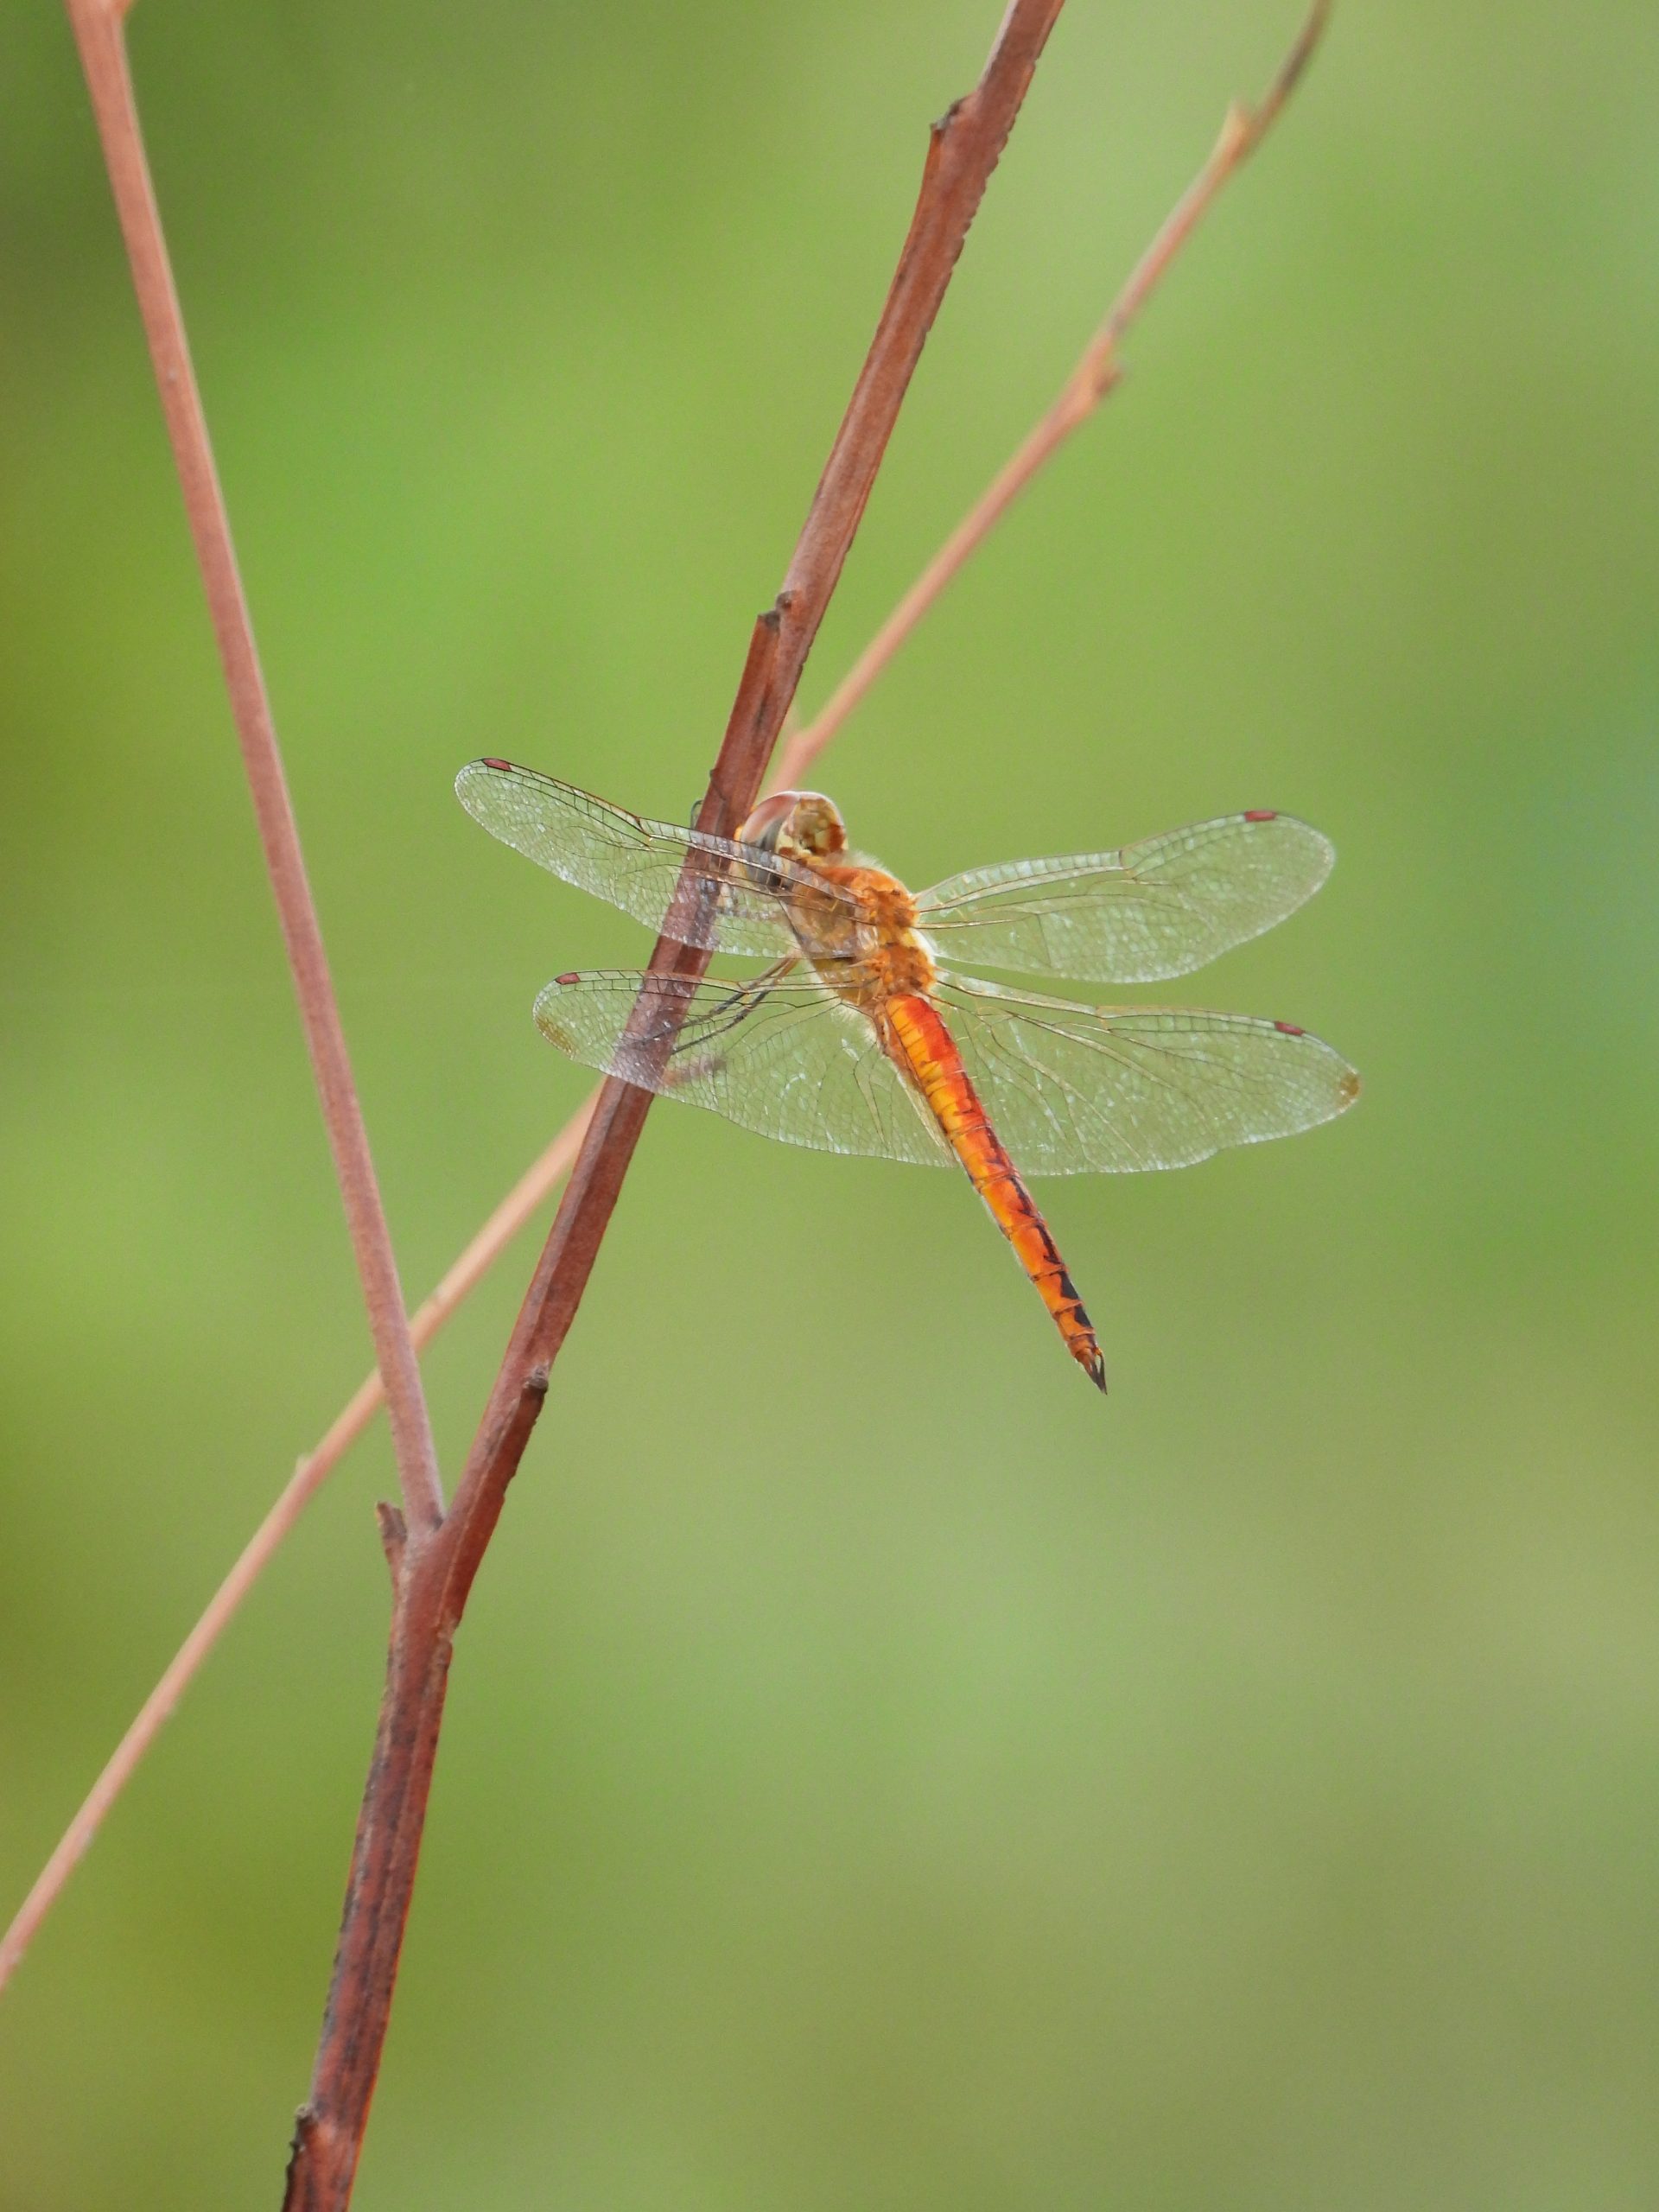 A dragonfly on a plant